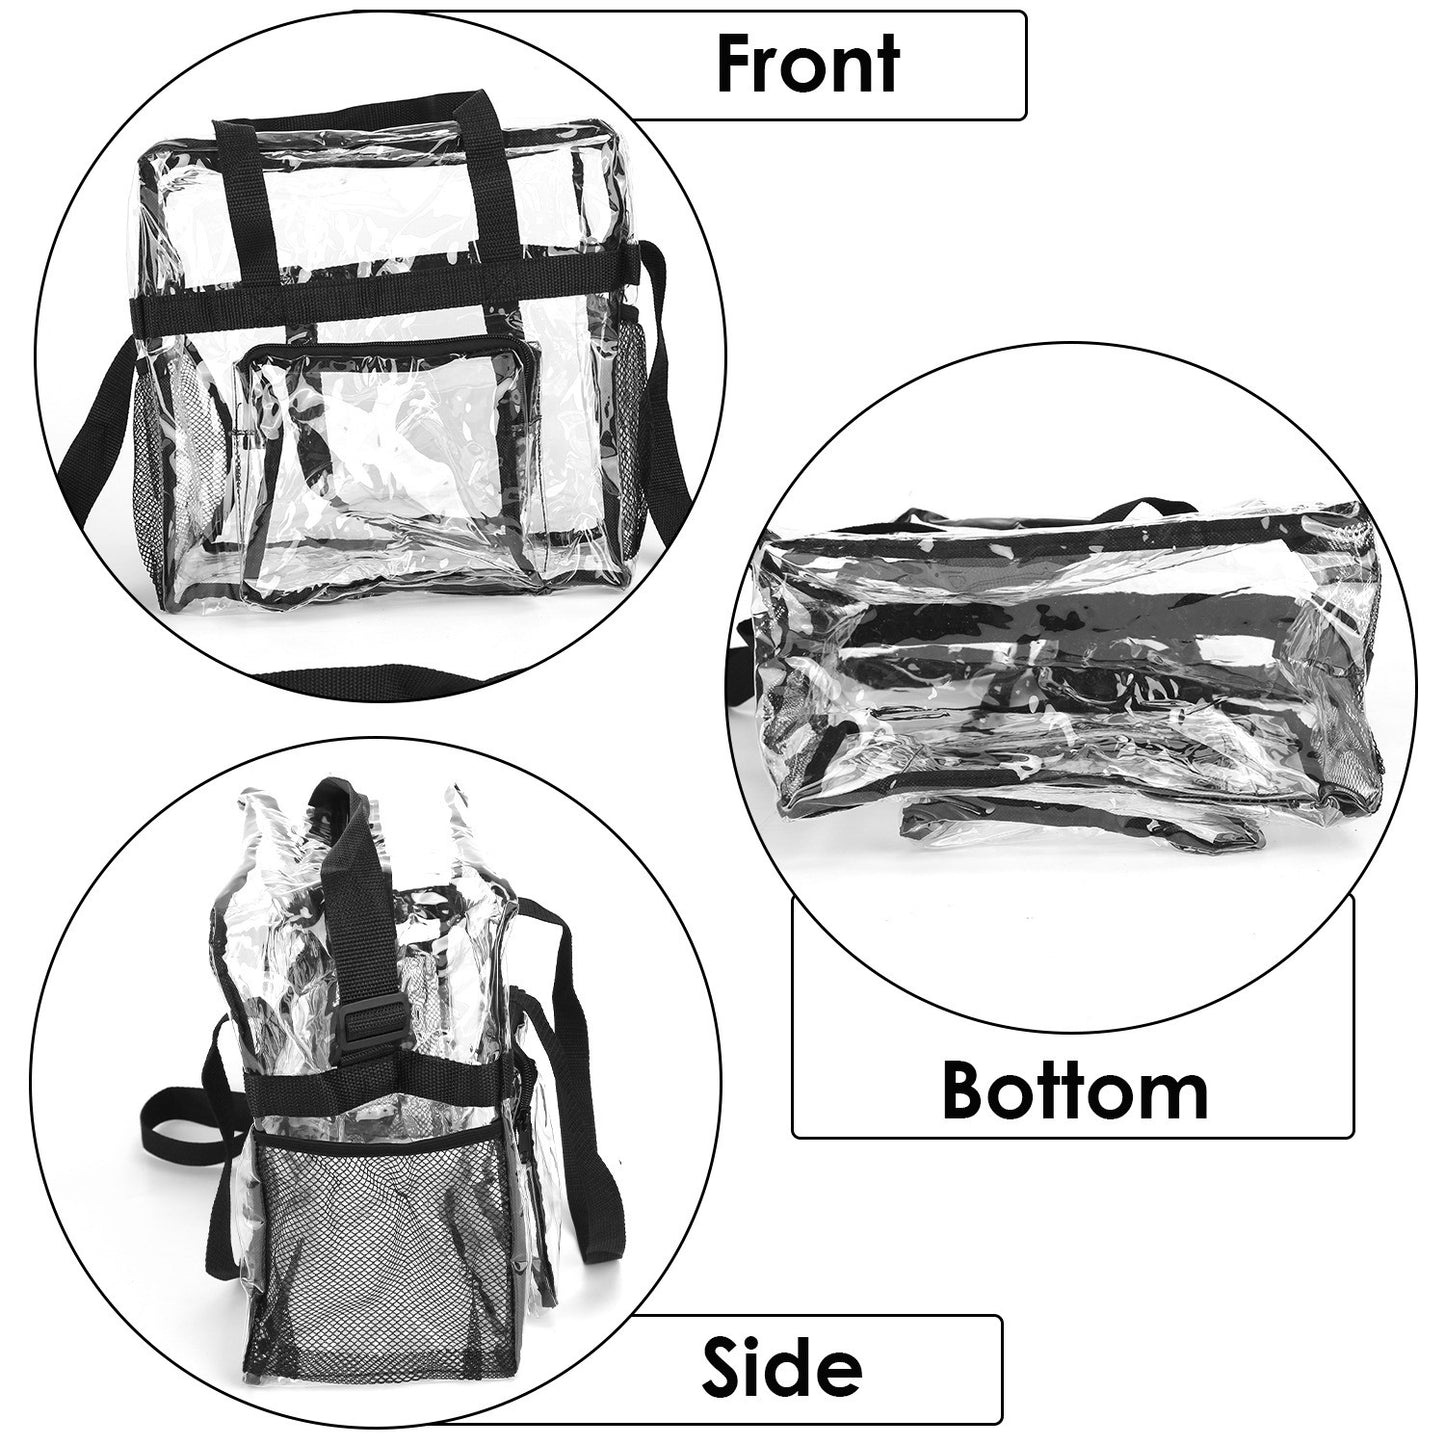 Clear Crossbody Bag Stadium Approved Clear Transparent Shoulder Bag See Through Zip Pouch Tote Bag Handbag with 11LBS Load